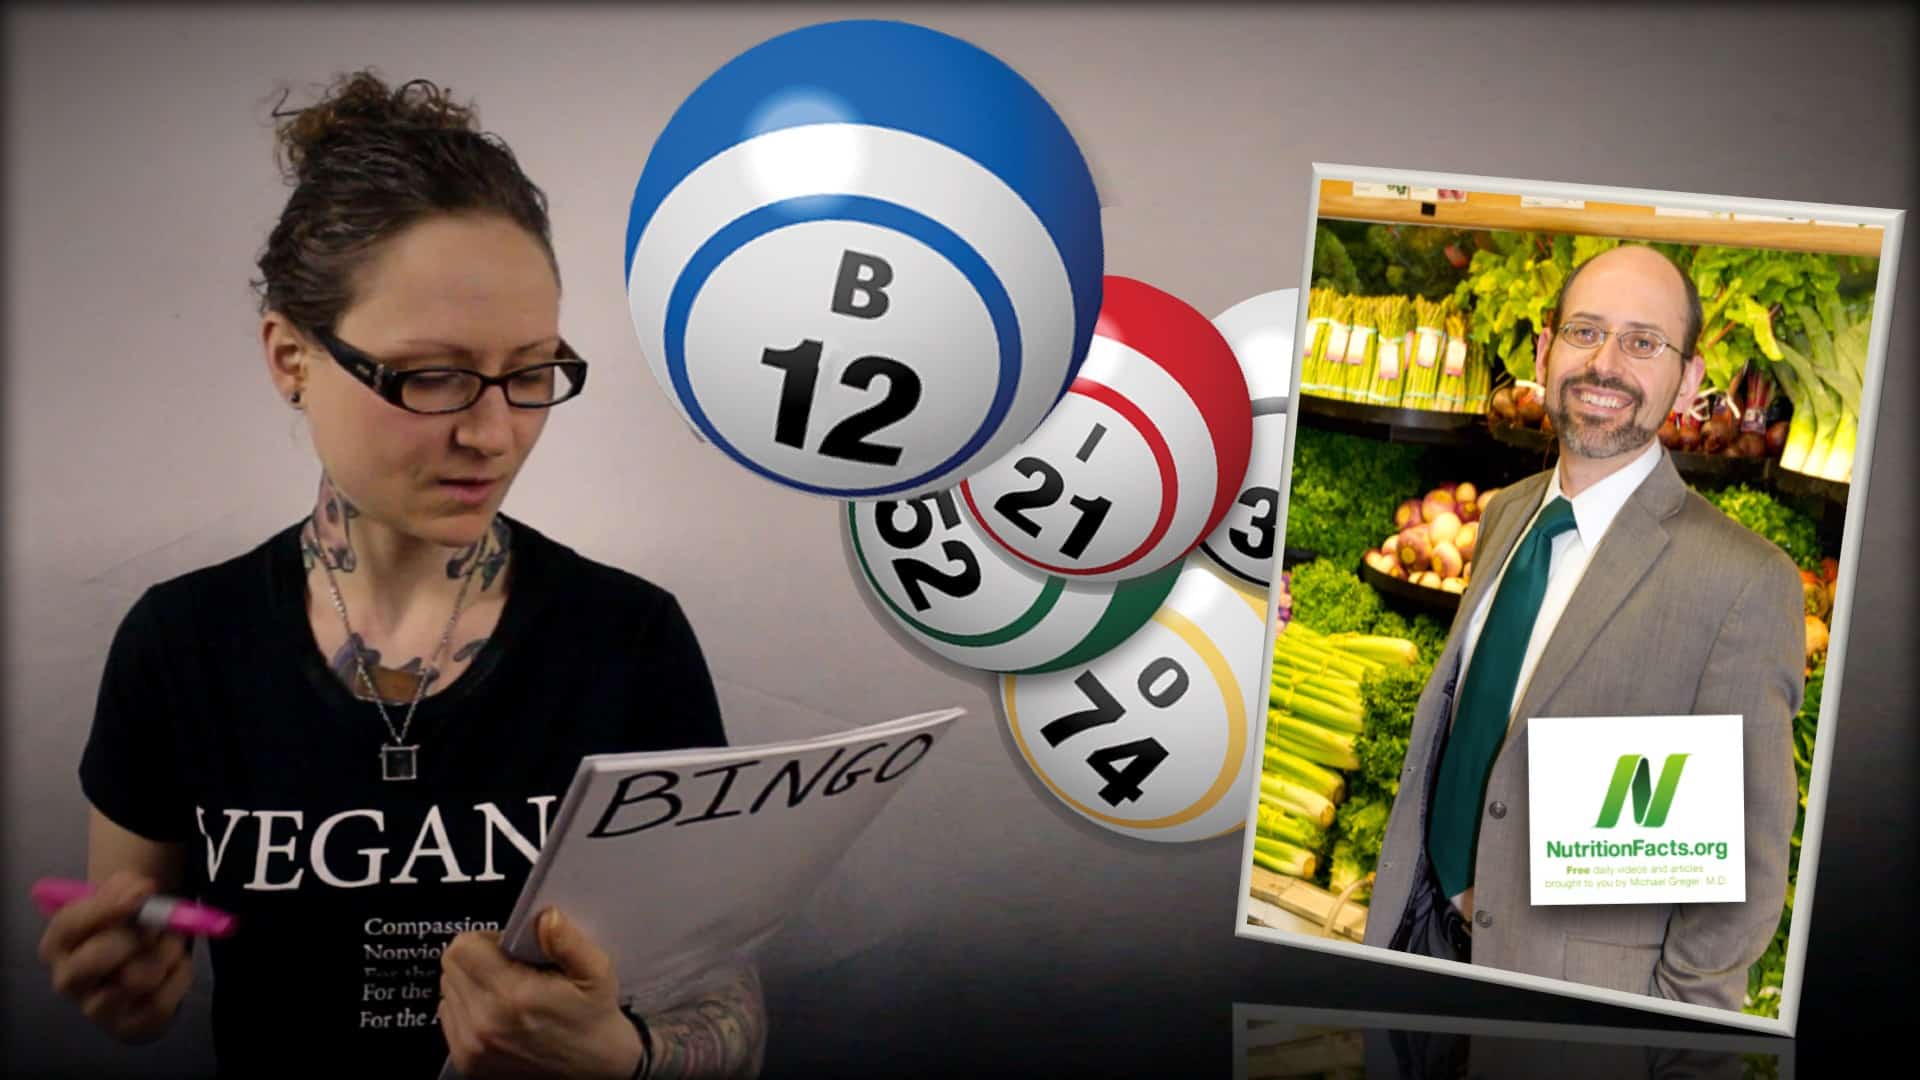 Emily Moran Barwick of Bite Size Vegan is shown filling in a Bingo card. Next to her is an image of a number of colorful bingo balls, one of which is labeled B12. Dr. Greger of NutritionFacts.org is seen as an inset photograph on the right.